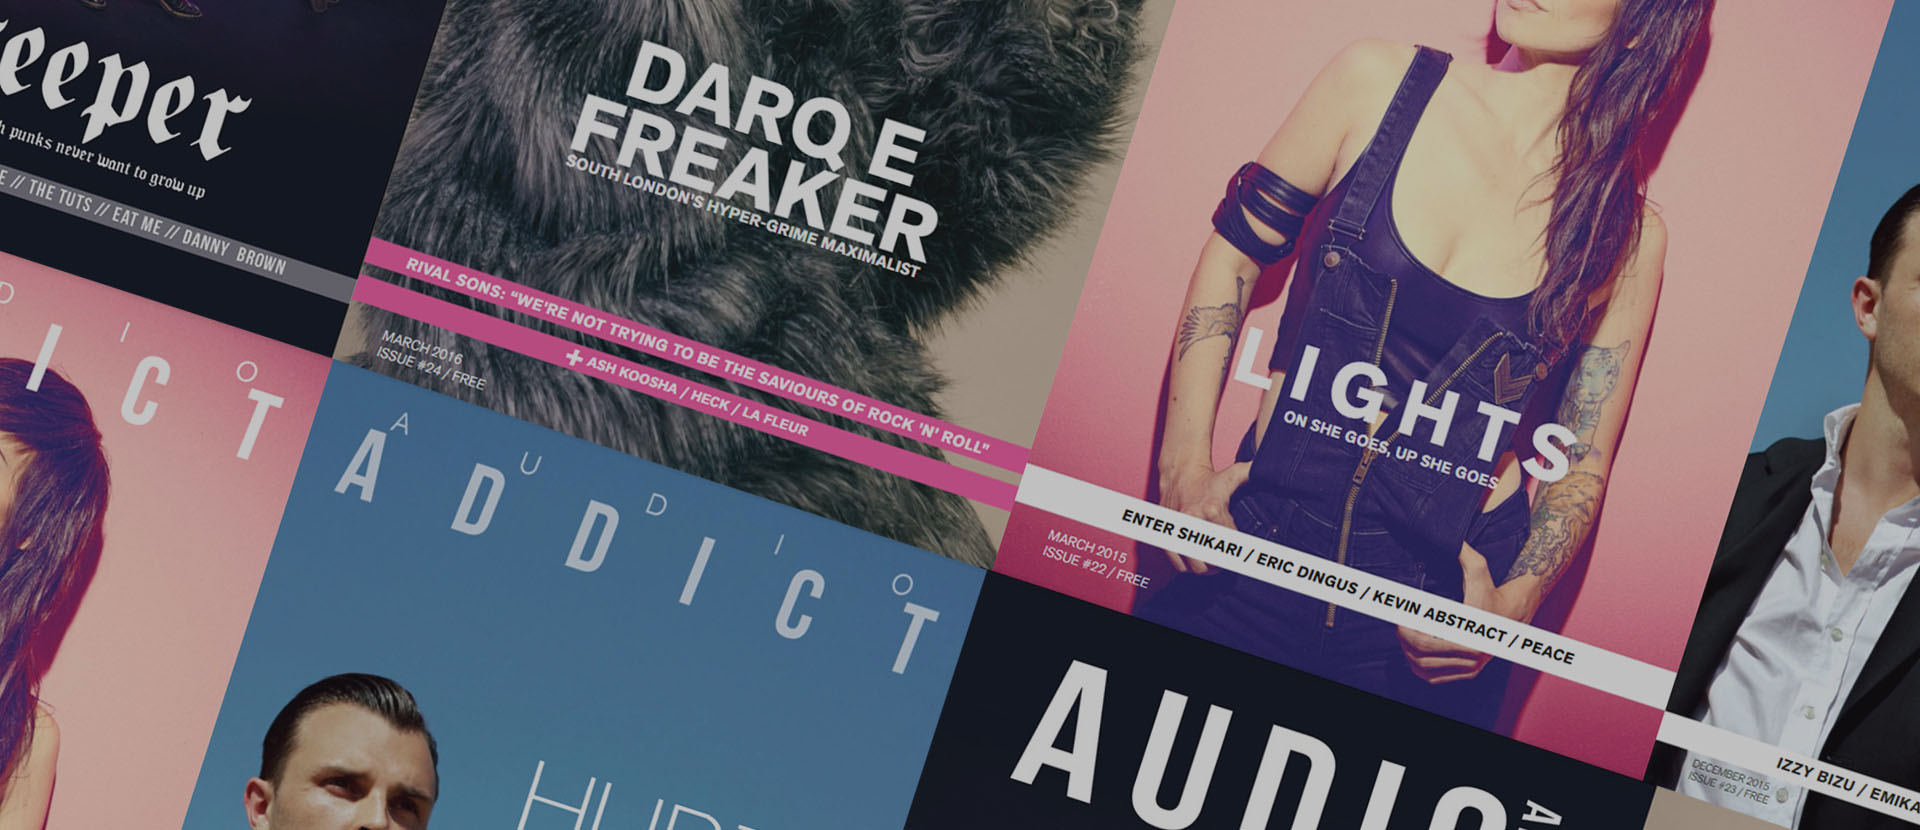 A collection of front covers from Audio Addict